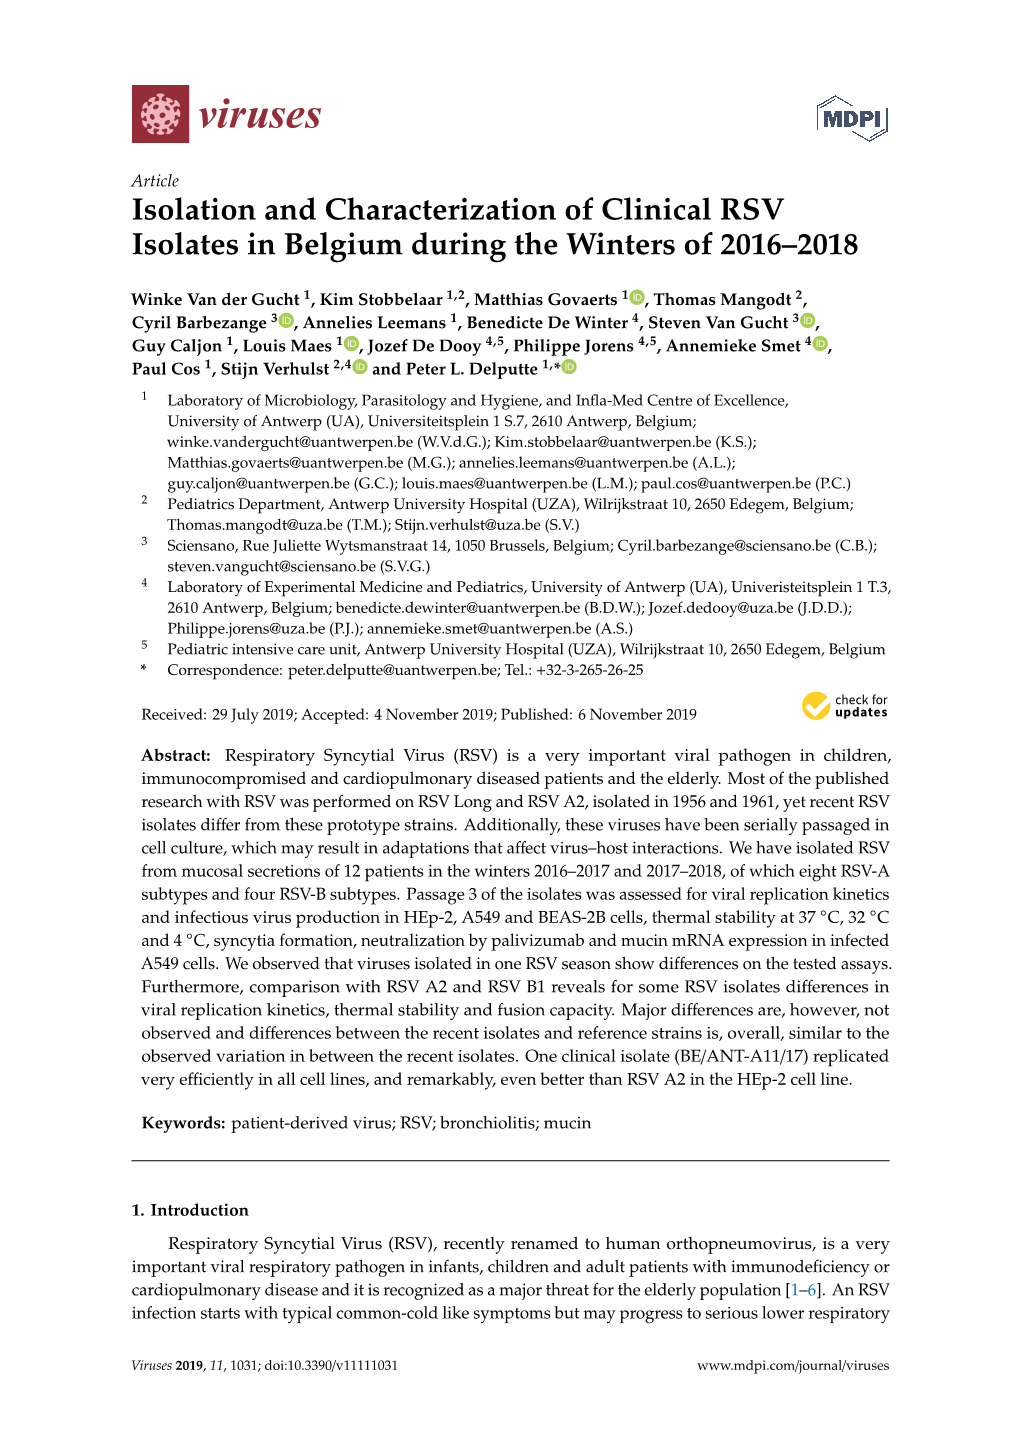 Isolation and Characterization of Clinical RSV Isolates in Belgium During the Winters of 2016–2018